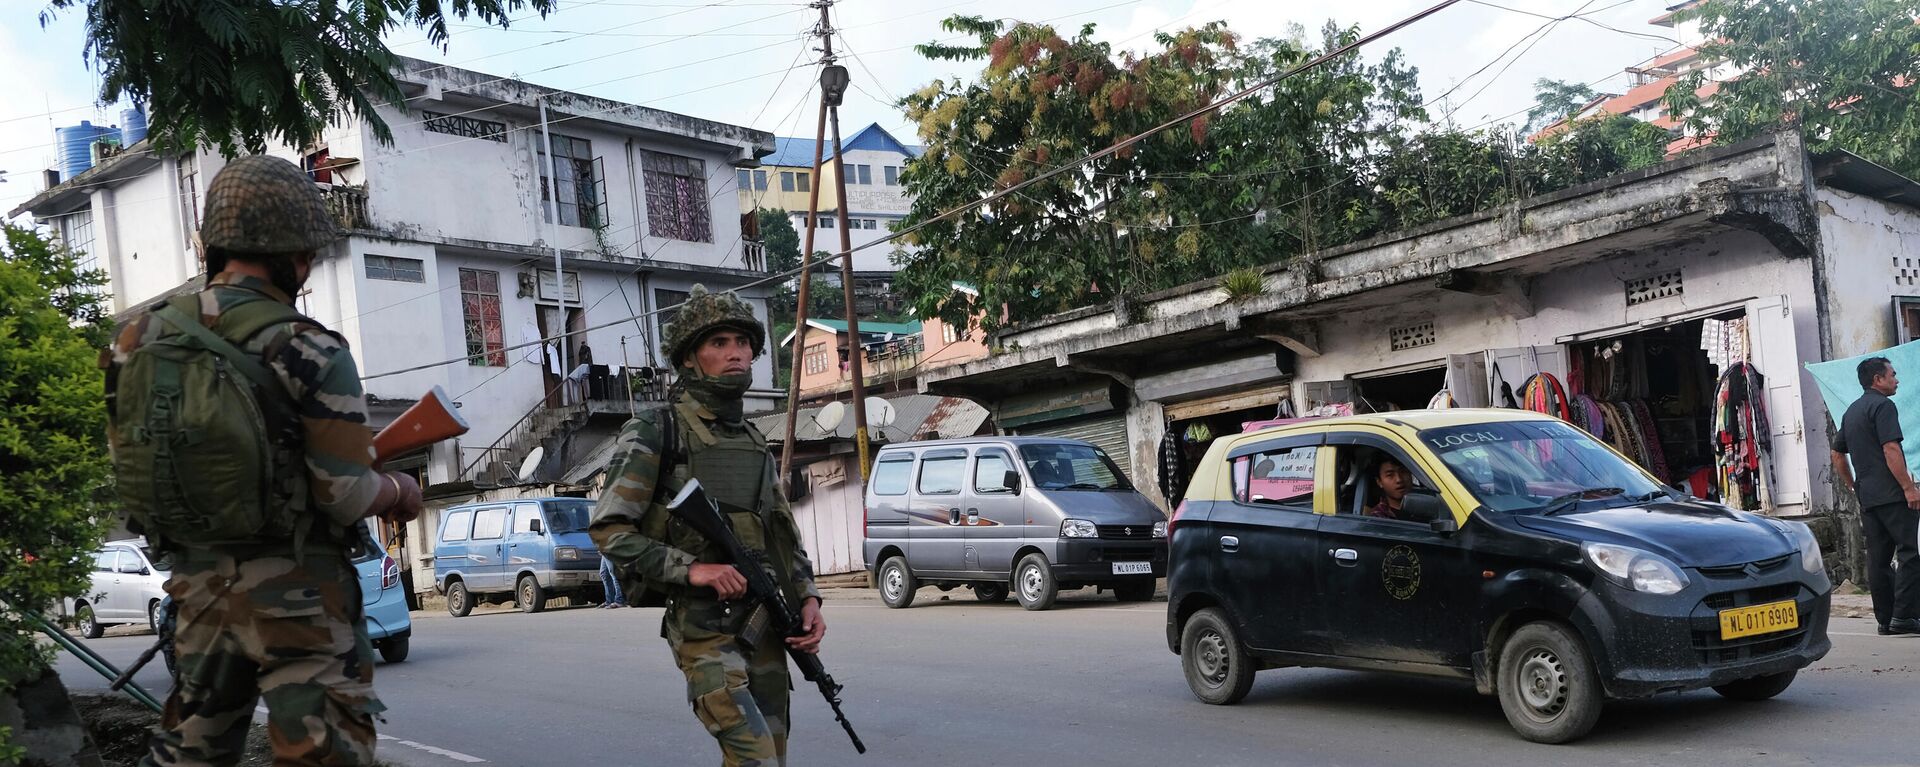 Soldiers stand guard on a street in Kohima, capital of the northeastern Indian state of Nagaland, Tuesday, Oct. 29, 2019 - Sputnik International, 1920, 21.12.2021